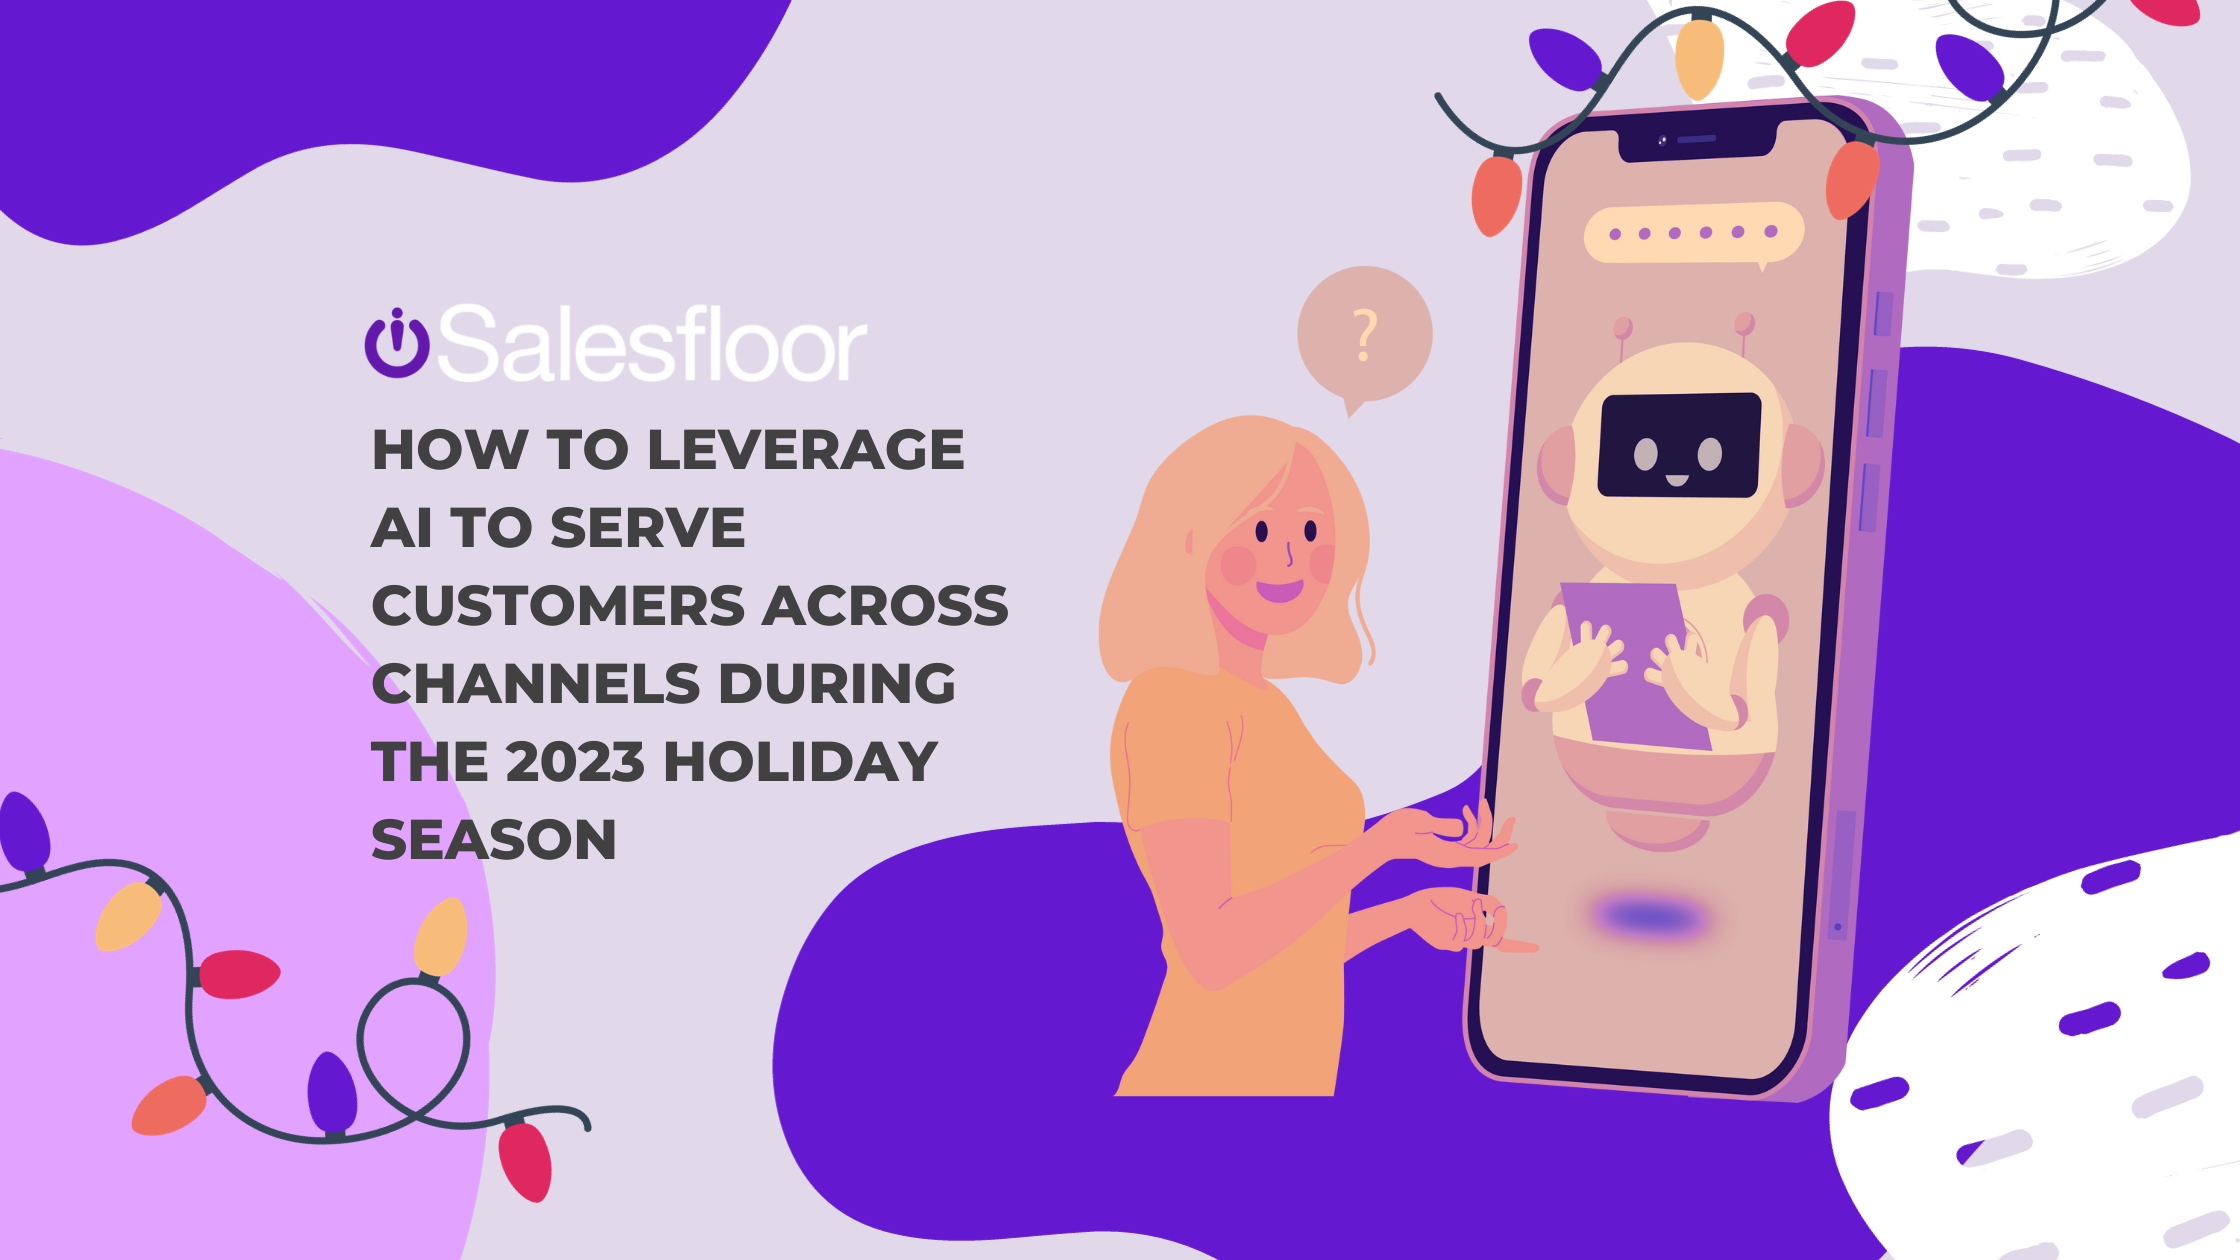 How to Leverage AI to Serve Customers Across Channels During the 2023 Holiday Season